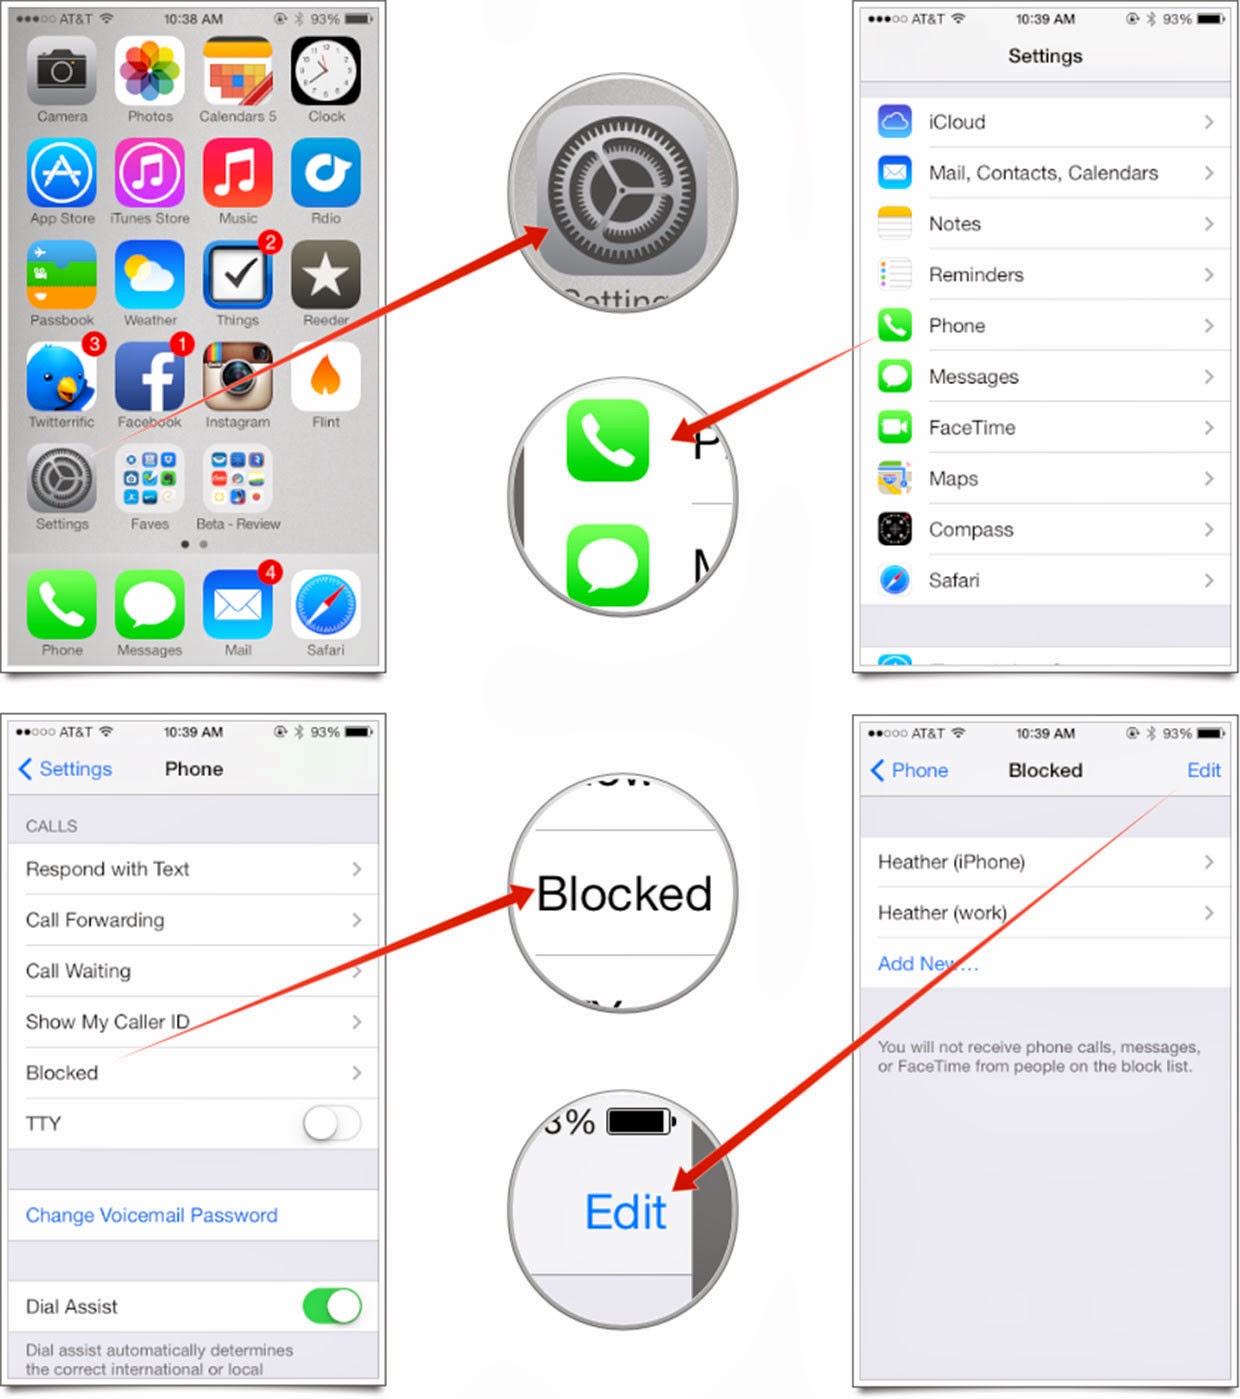 iOS 9: What You Need to Know About Ad Blocking on Mobile - Total Media